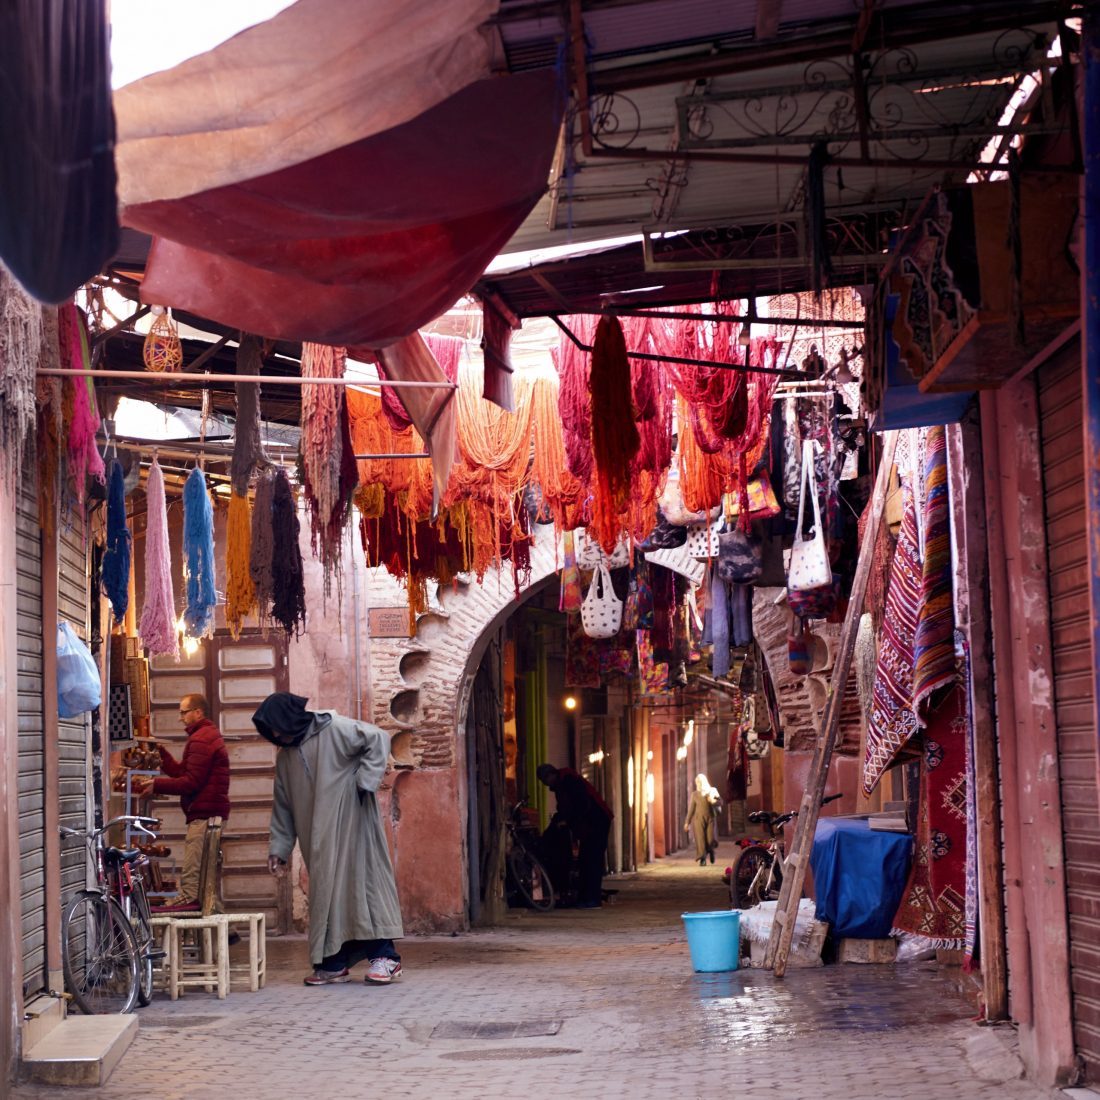 The El Fenn Blog - Our Hotlist of What To See and Do When in Marrakech